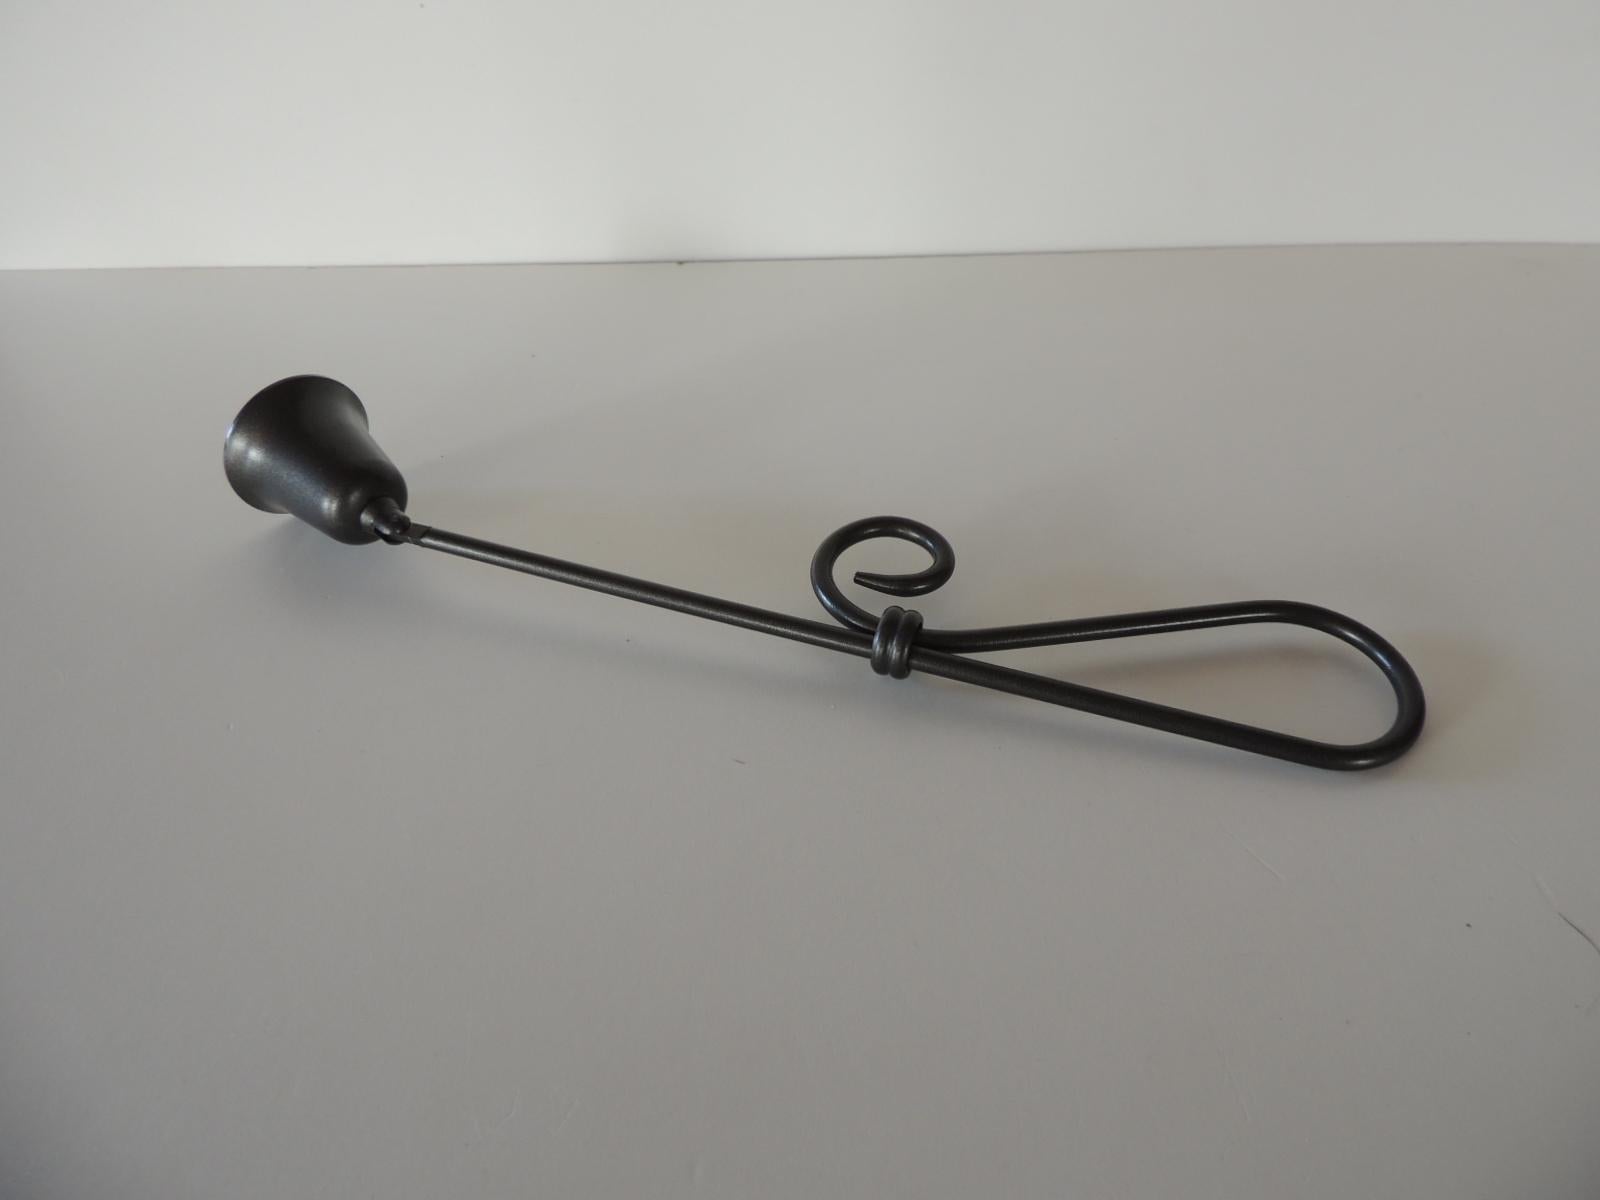 Pewter articulated arm candle snuffer
Size: 9.5